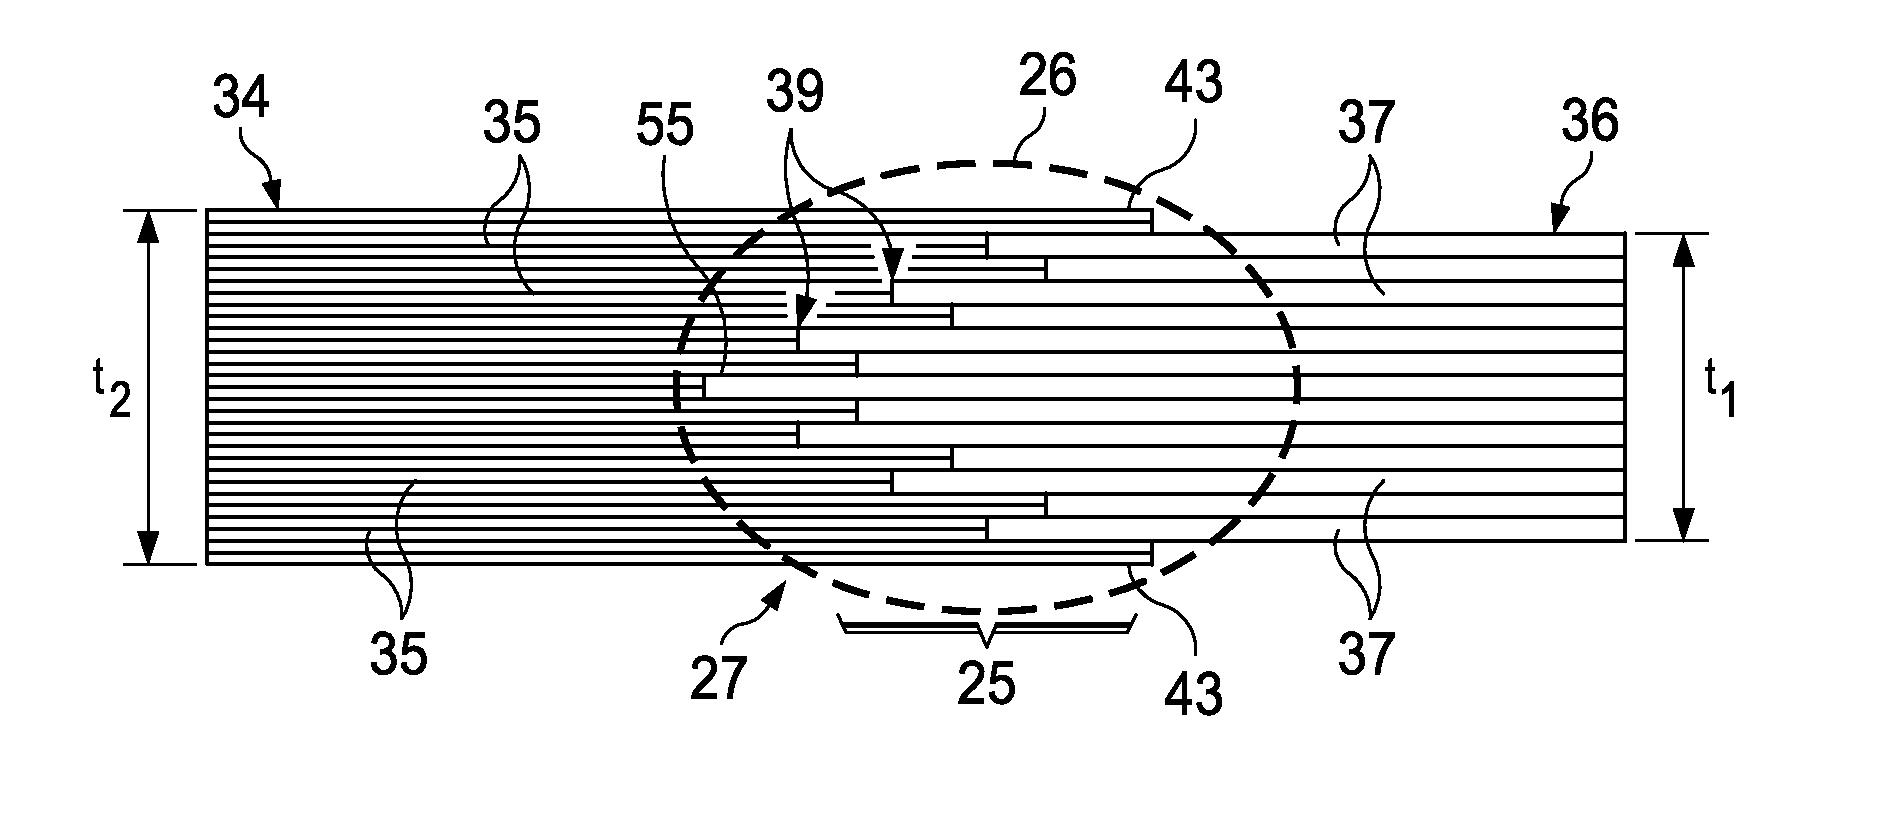 Multi-Layer Metallic Structure and Composite-to-Metal Joint Methods